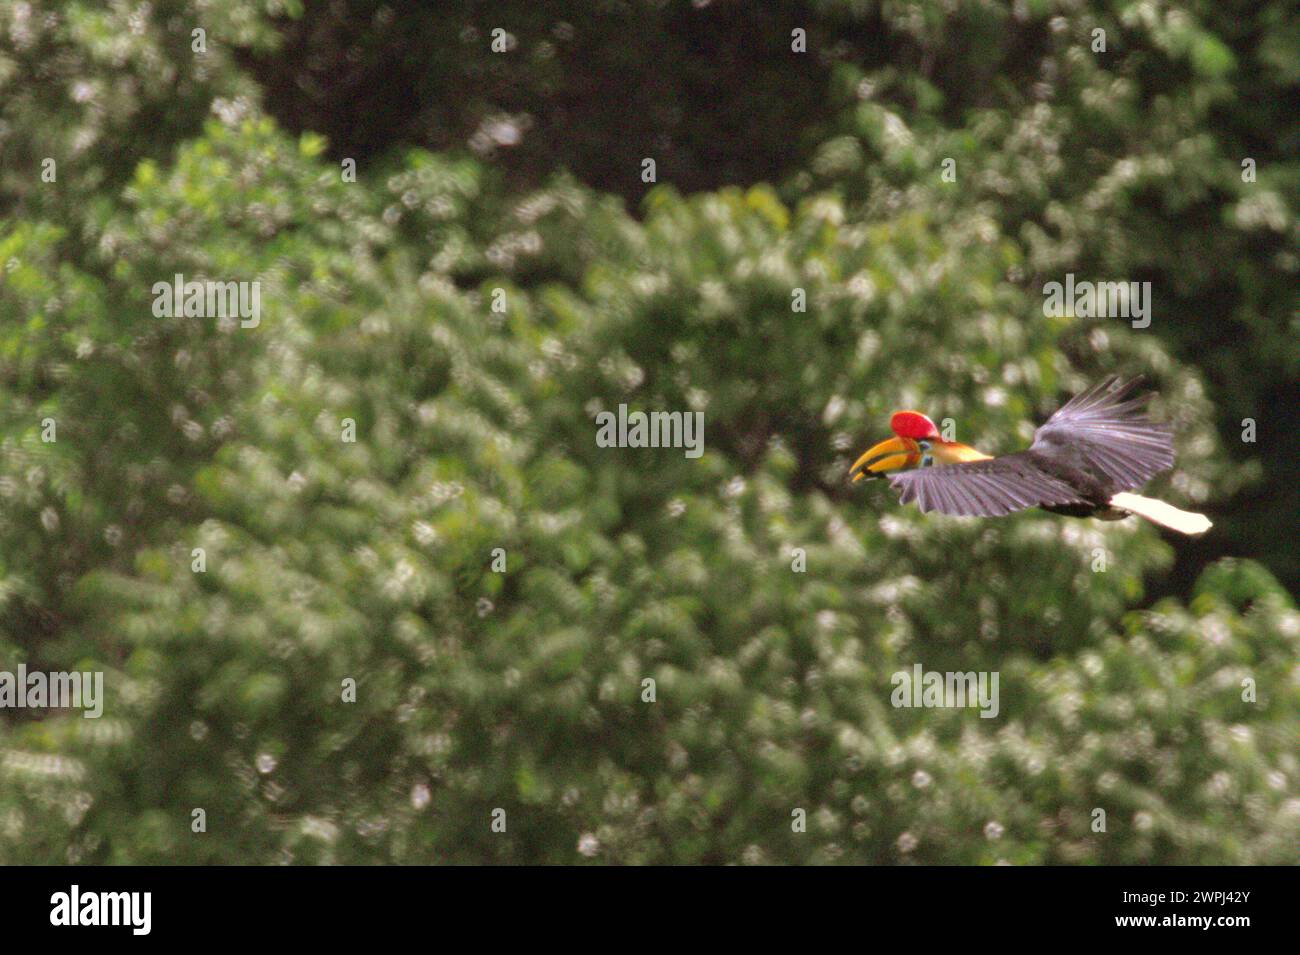 A knobbed hornbill (Rhyticeros cassidix) male flies through a forest area near Mount Tangkoko and Duasudara in Bitung, North Sulawesi, Indonesia. The International Union for Conservation of Nature (IUCN) concludes that rising temperatures have led to—among others—ecological, behavioral, and physiological changes in wildlife species and biodiversity. 'In addition to increased rates of disease and degraded habitats, climate change is also causing changes in species themselves, which threaten their survival,' they wrote in a publication on IUCN.org. Stock Photo